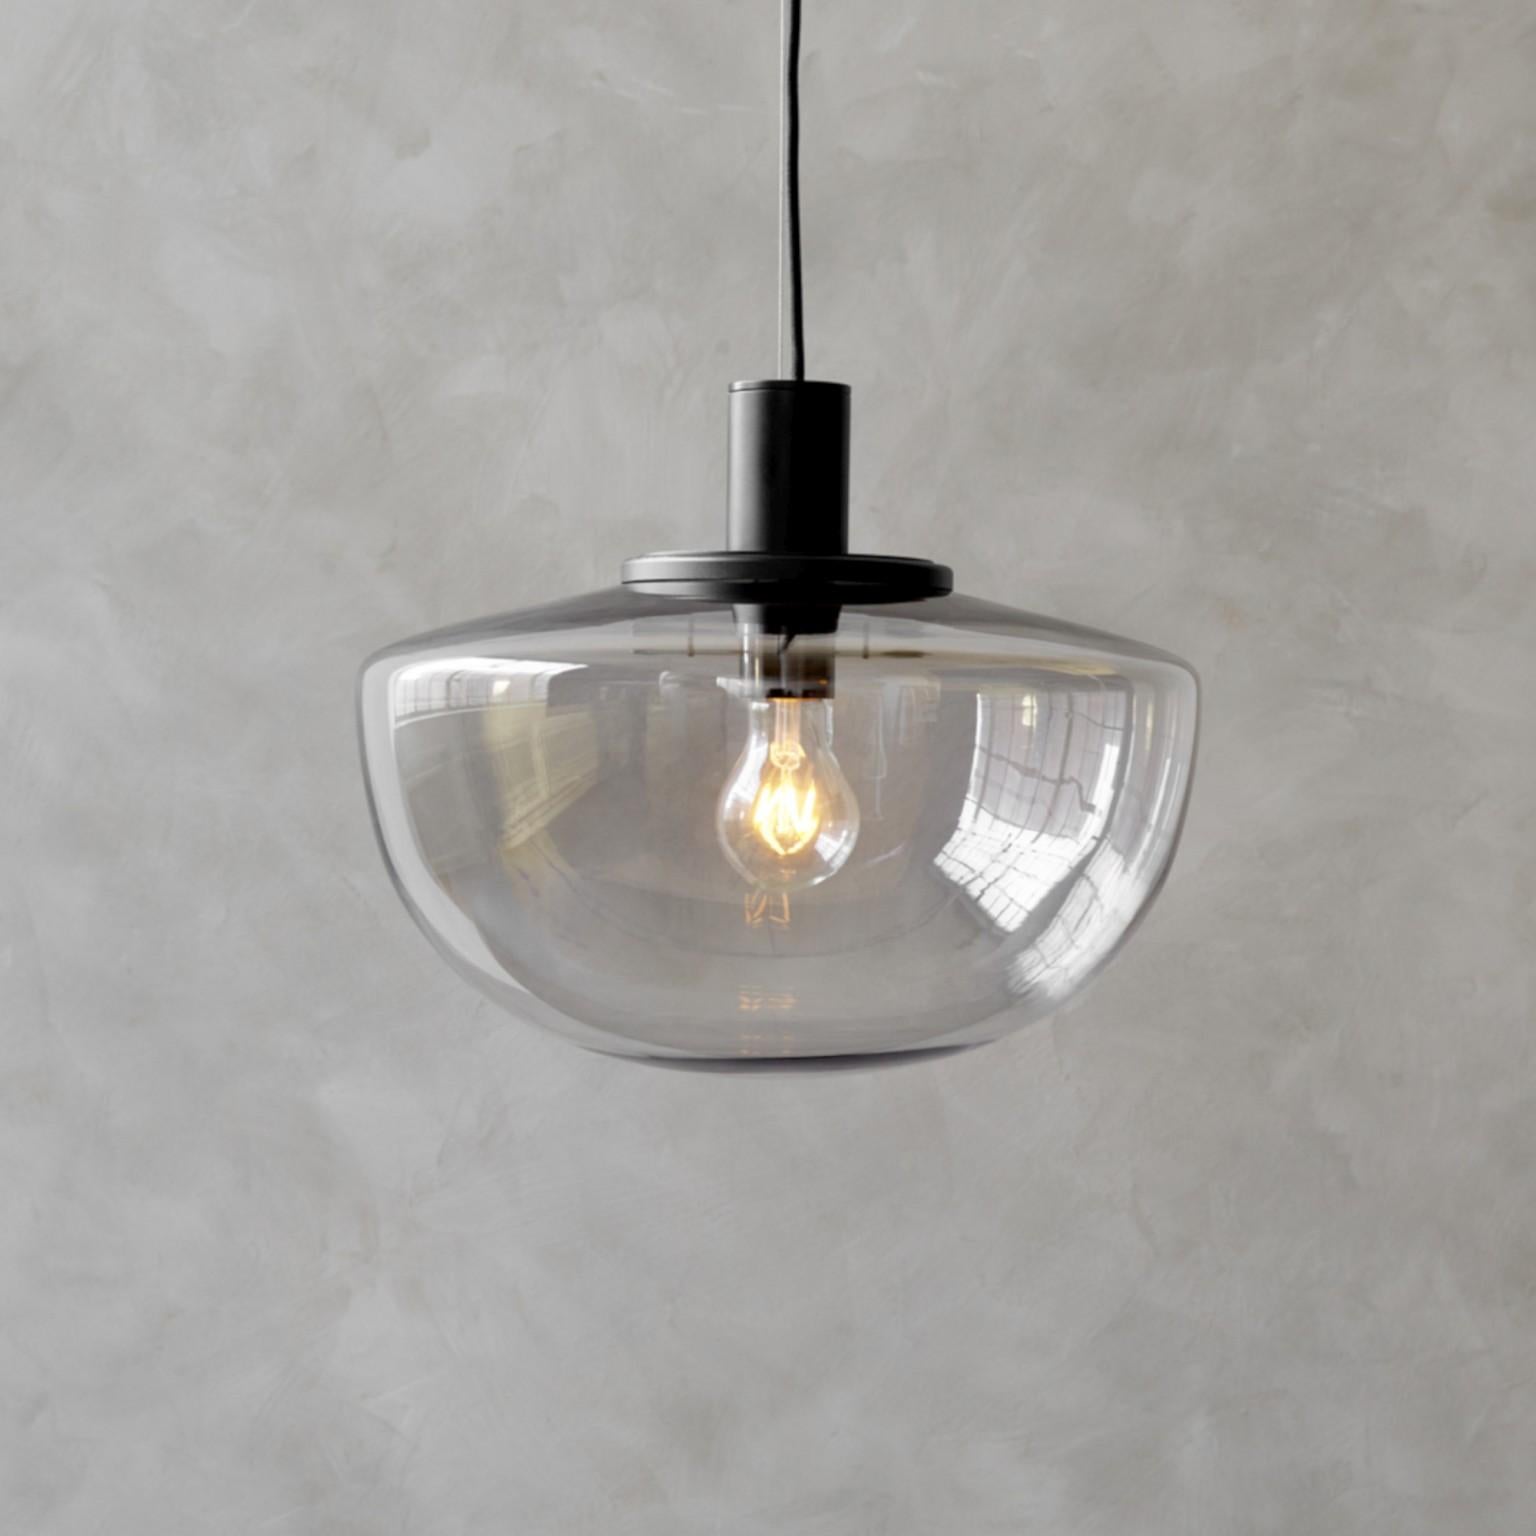 Chinese Bank Pendant, Smoked Glass by Norm Architects For Sale